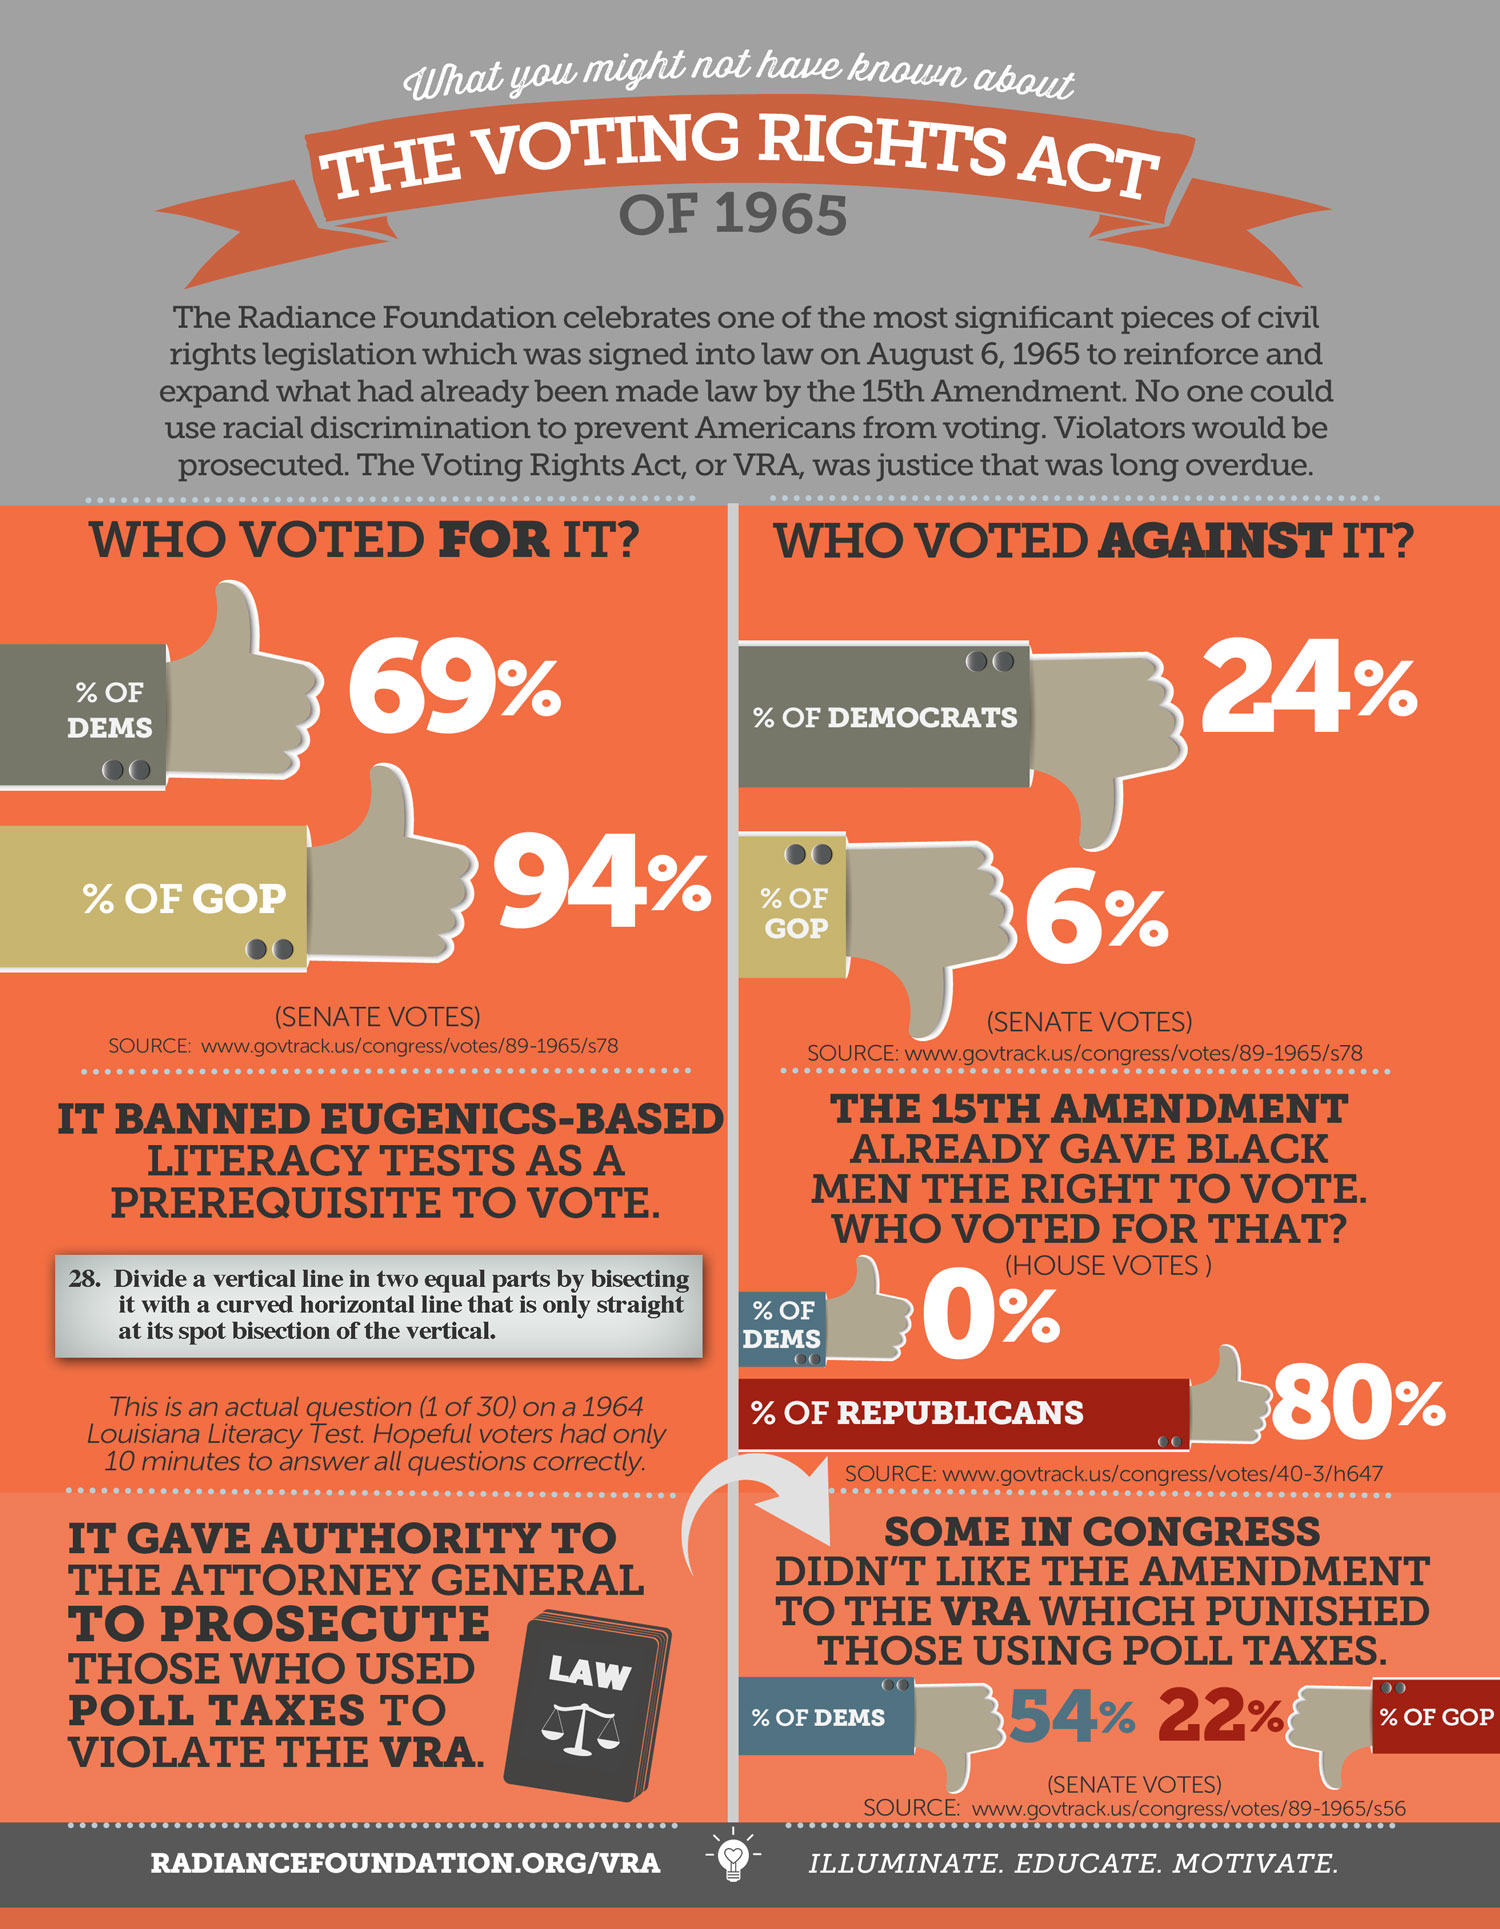 "Voting Rights Act" by The Radiance Foundation